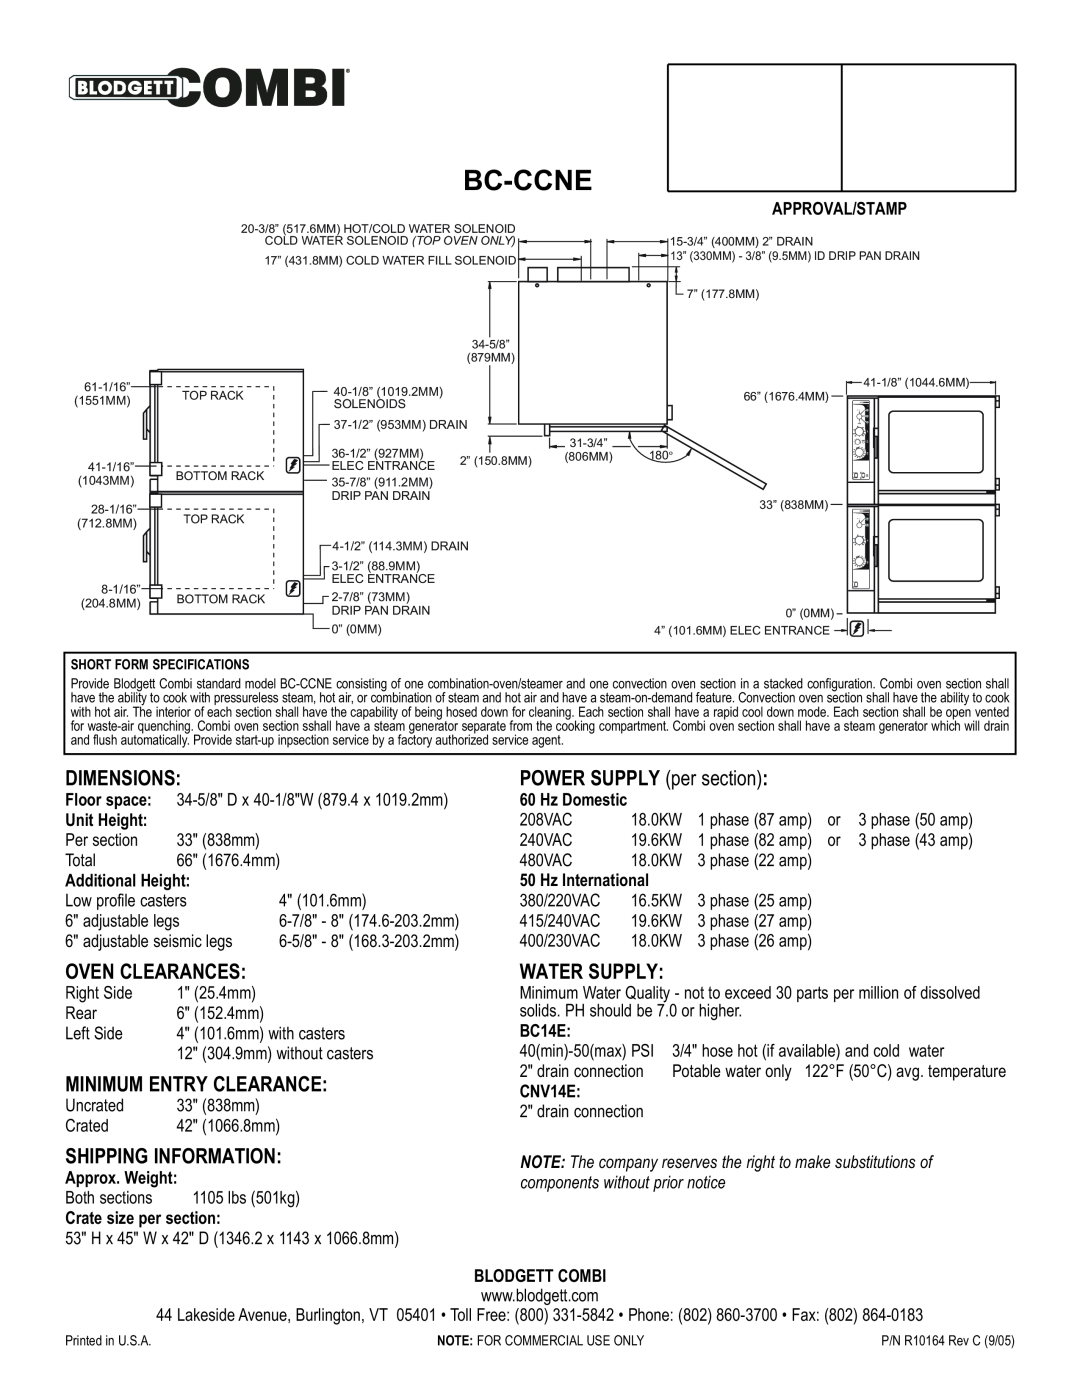 Blodgett BC-CCNE Dimensions, POWER SUPPLY per section, Oven Clearances, Minimum Entry Clearance, Shipping Information 